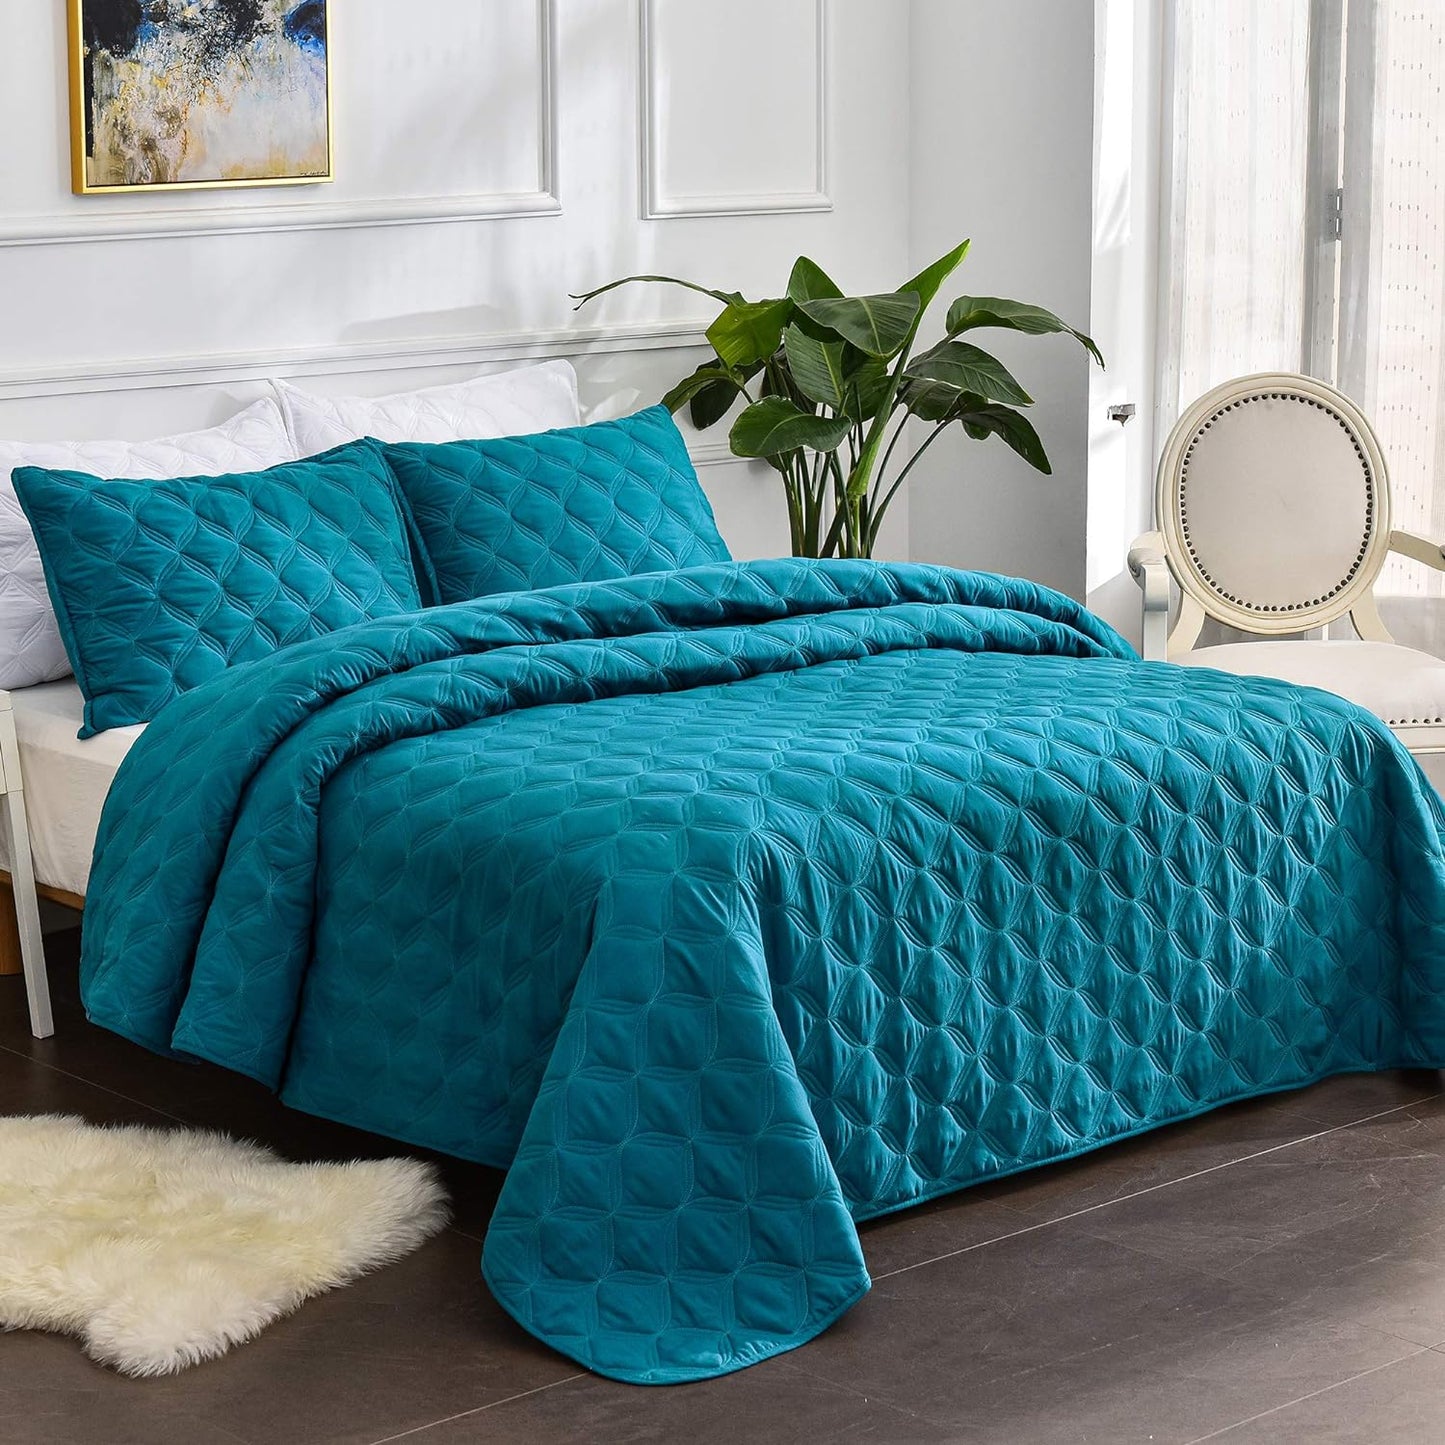 Litanika King Size Quilt Bedding Set - Teal Lightweight Comforter Bedspreads & Coverlets Turquoise - Bedding Cover Bed Decor All Season - 3 Pieces (1 Quilt, 2 Pillowcases)